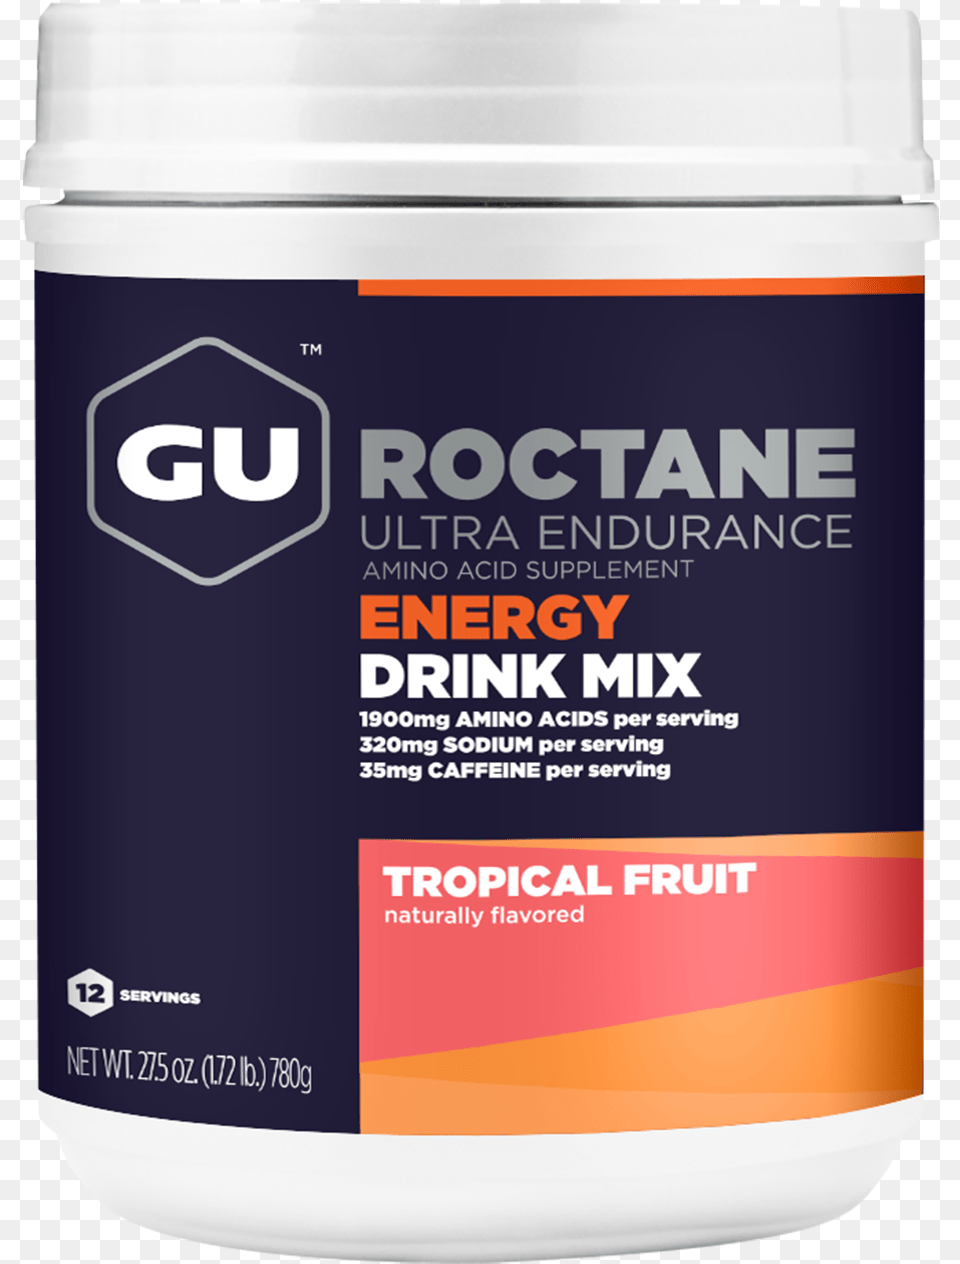 Gu Roctane Energy Drink Mix Roctane Energy Drink, Bottle, Can, Tin, Cosmetics Free Png Download